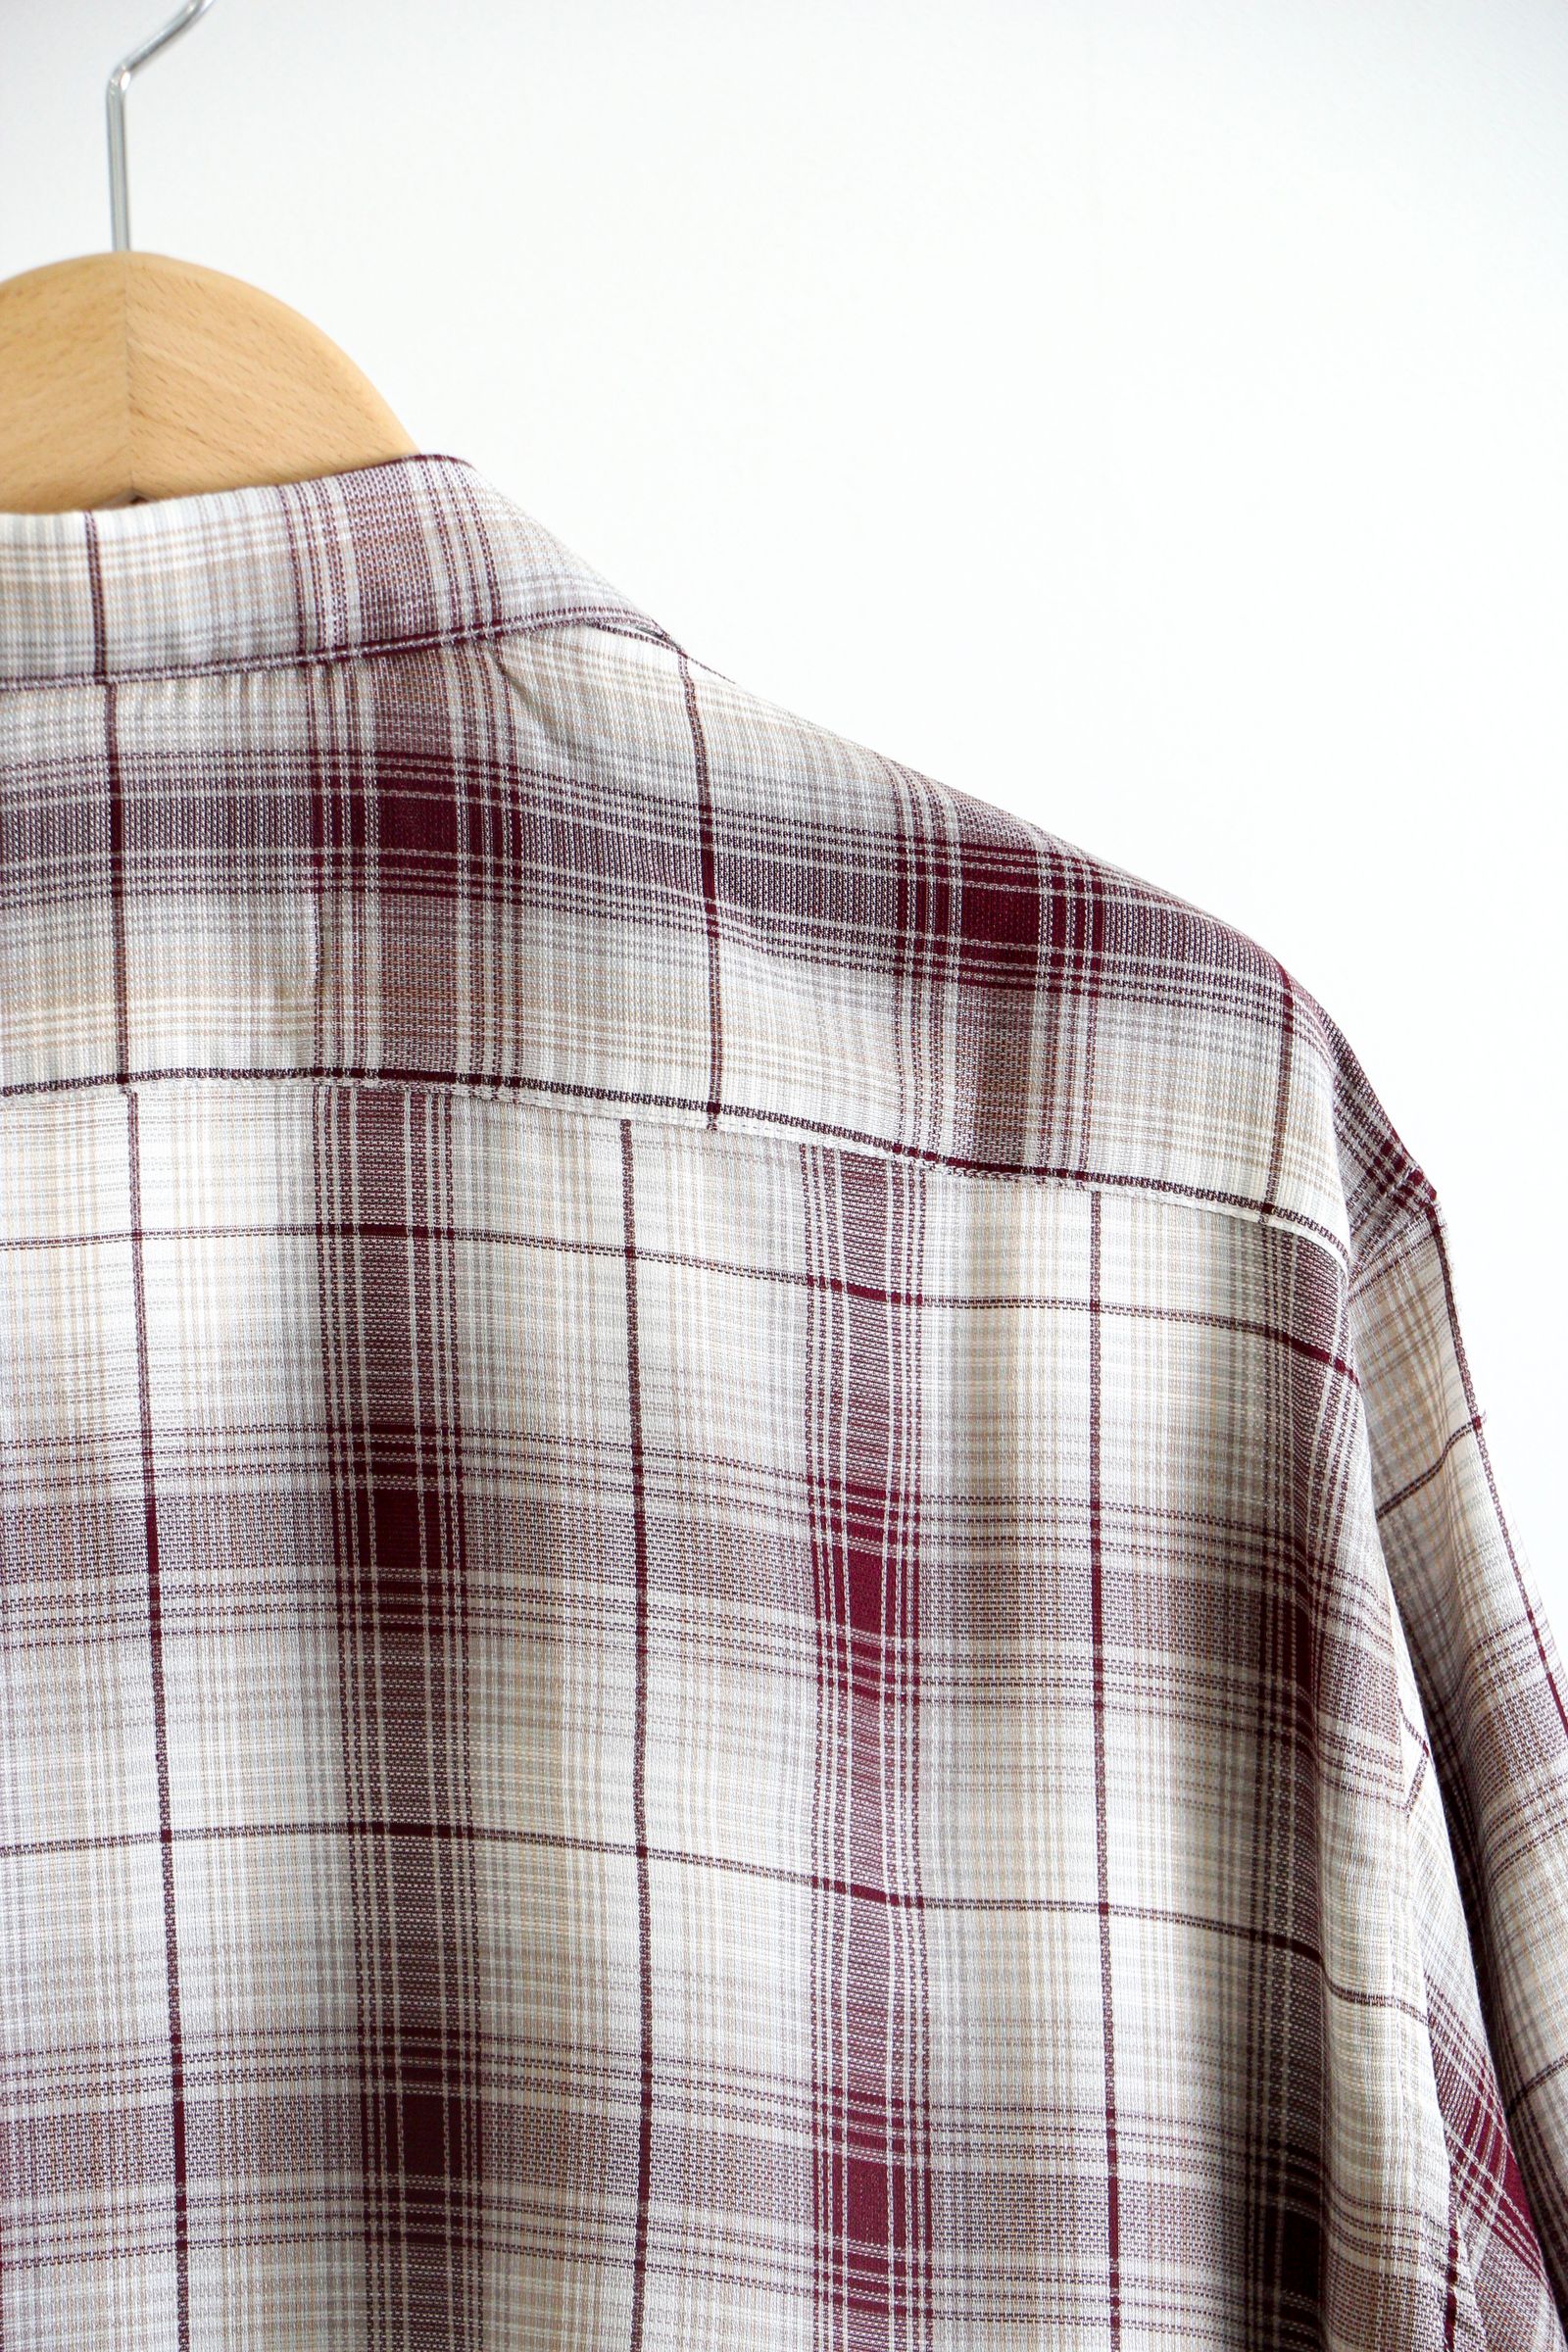 SEVEN BY SEVEN - OPEN COLLAR SHIRTS S/S - Modal panama check - RED 